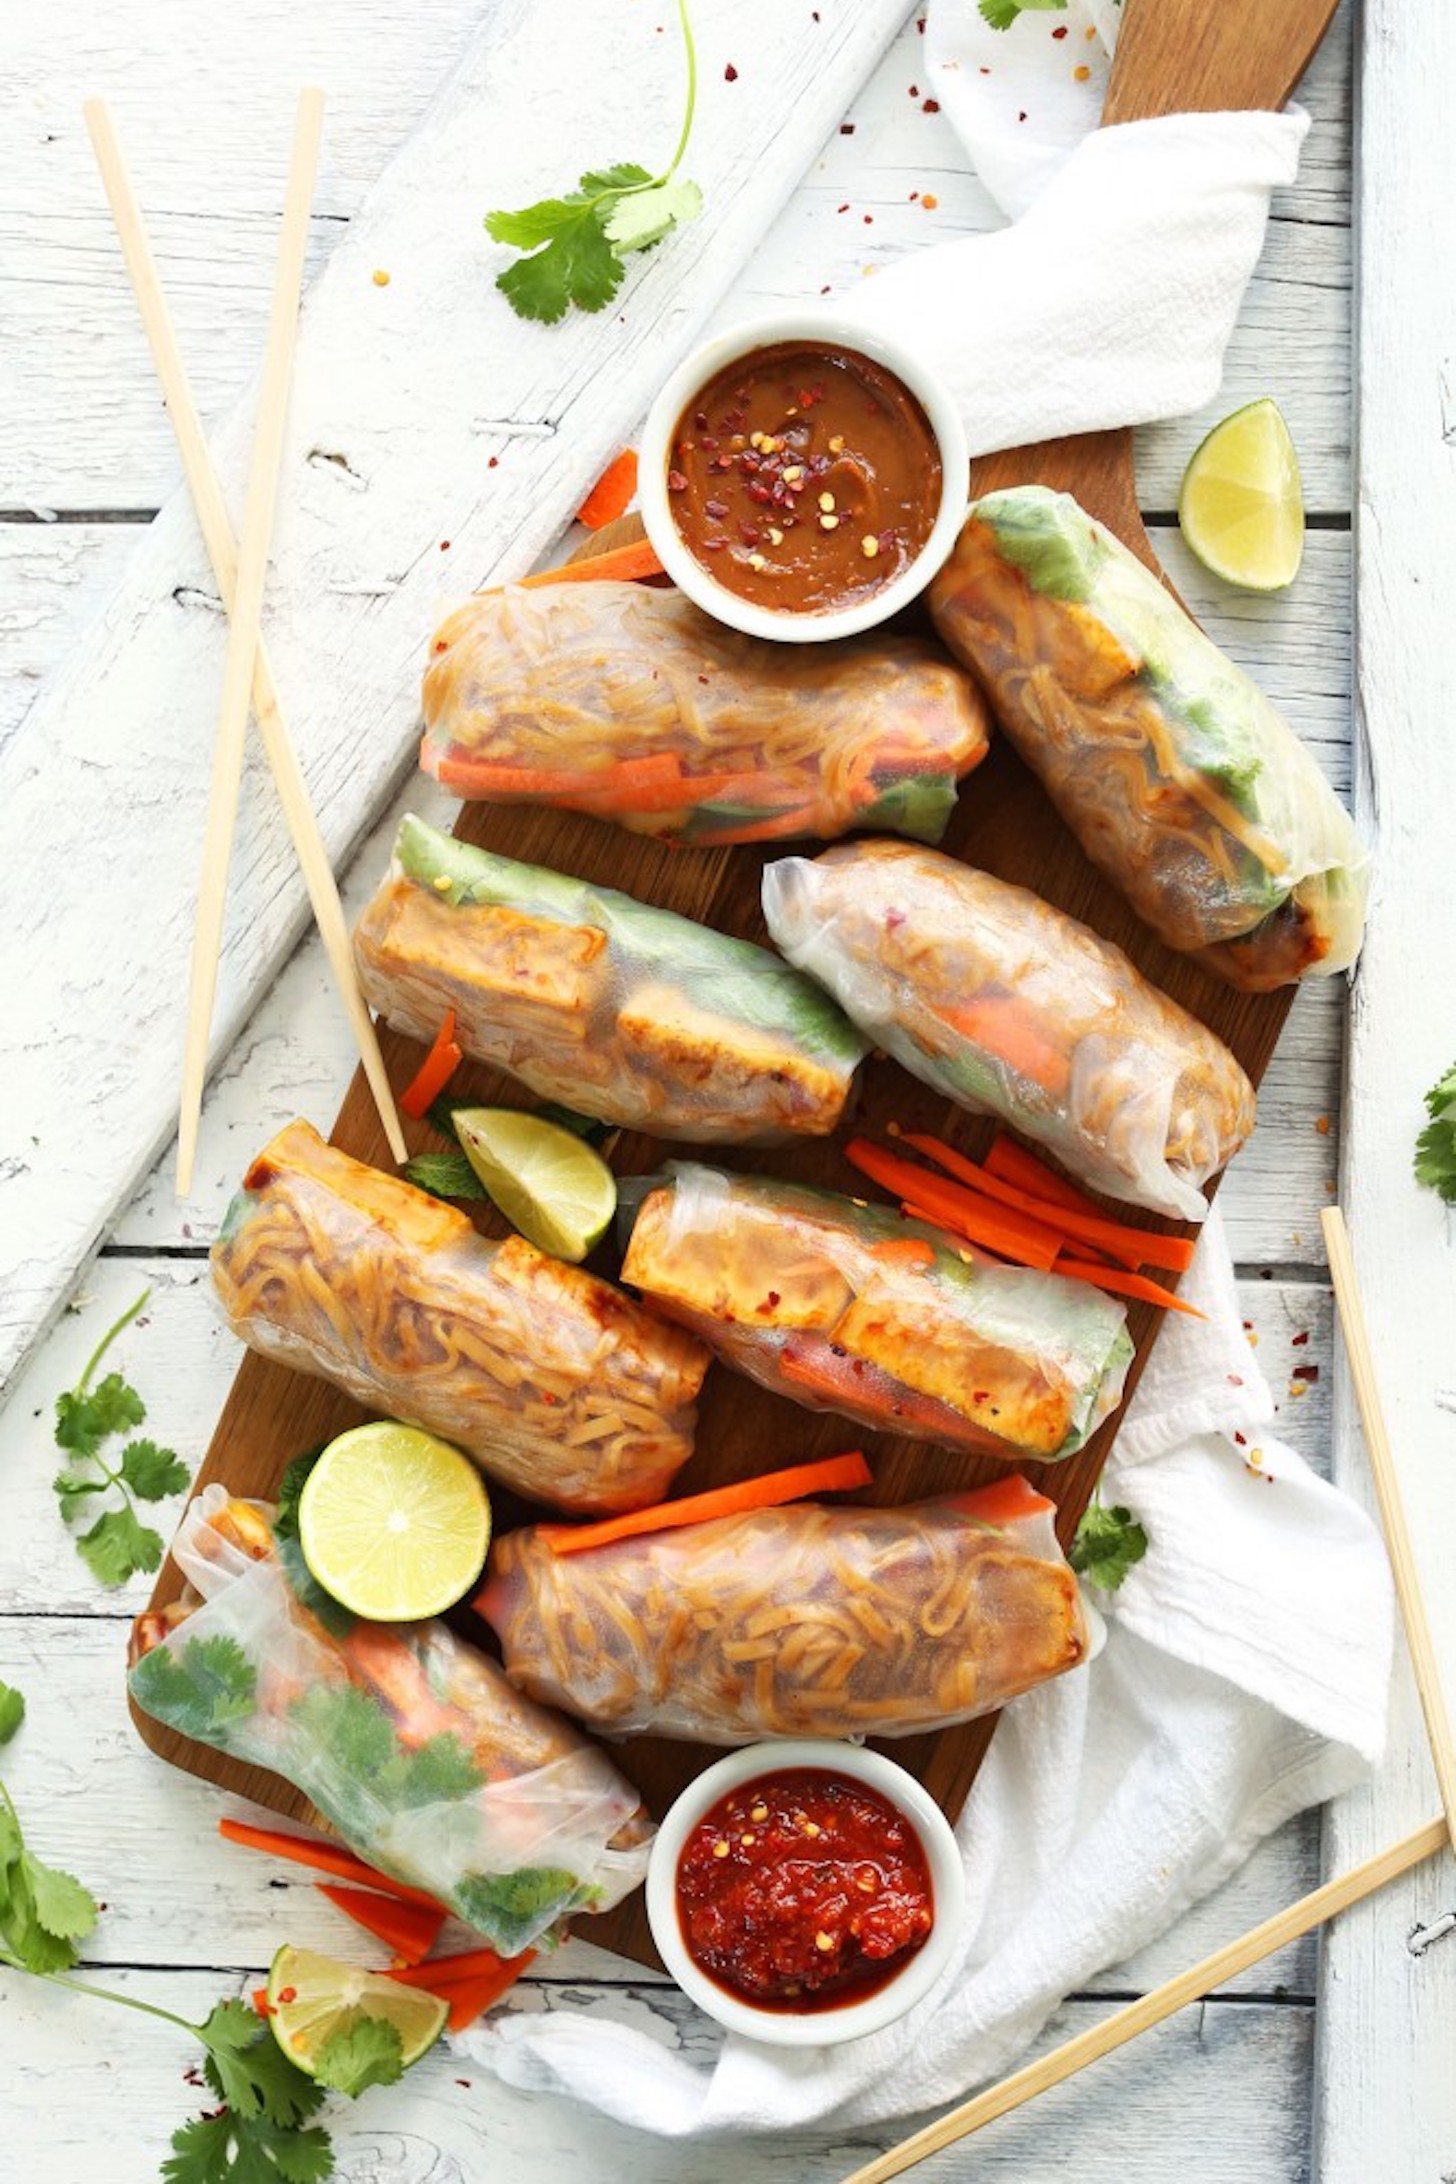 Spring Roll Recipe - Craving Home Cooked